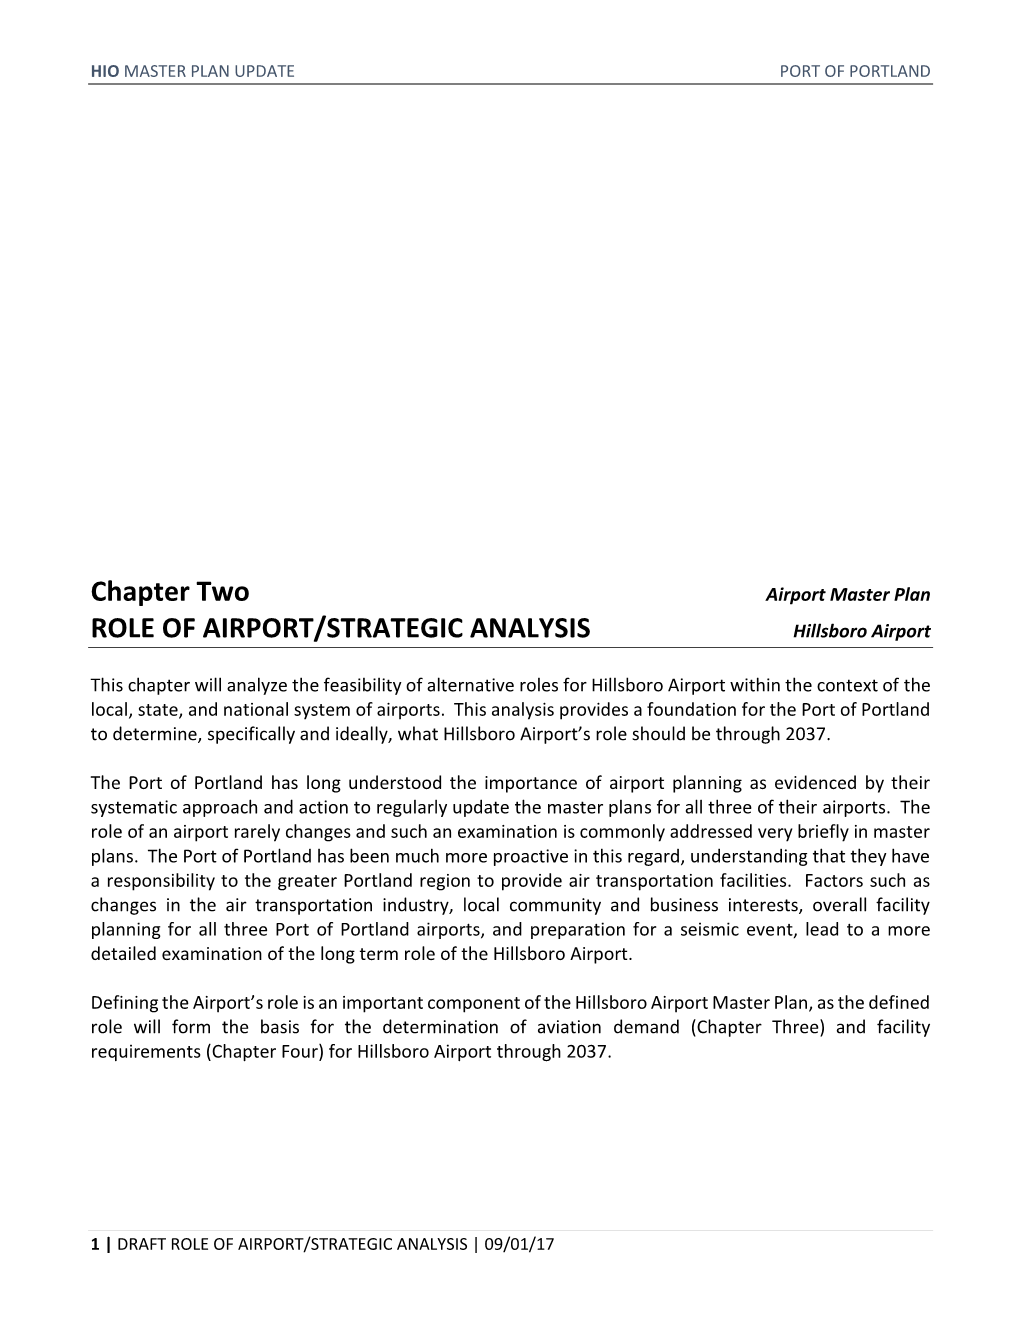 Chapter Two ROLE of AIRPORT/STRATEGIC ANALYSIS